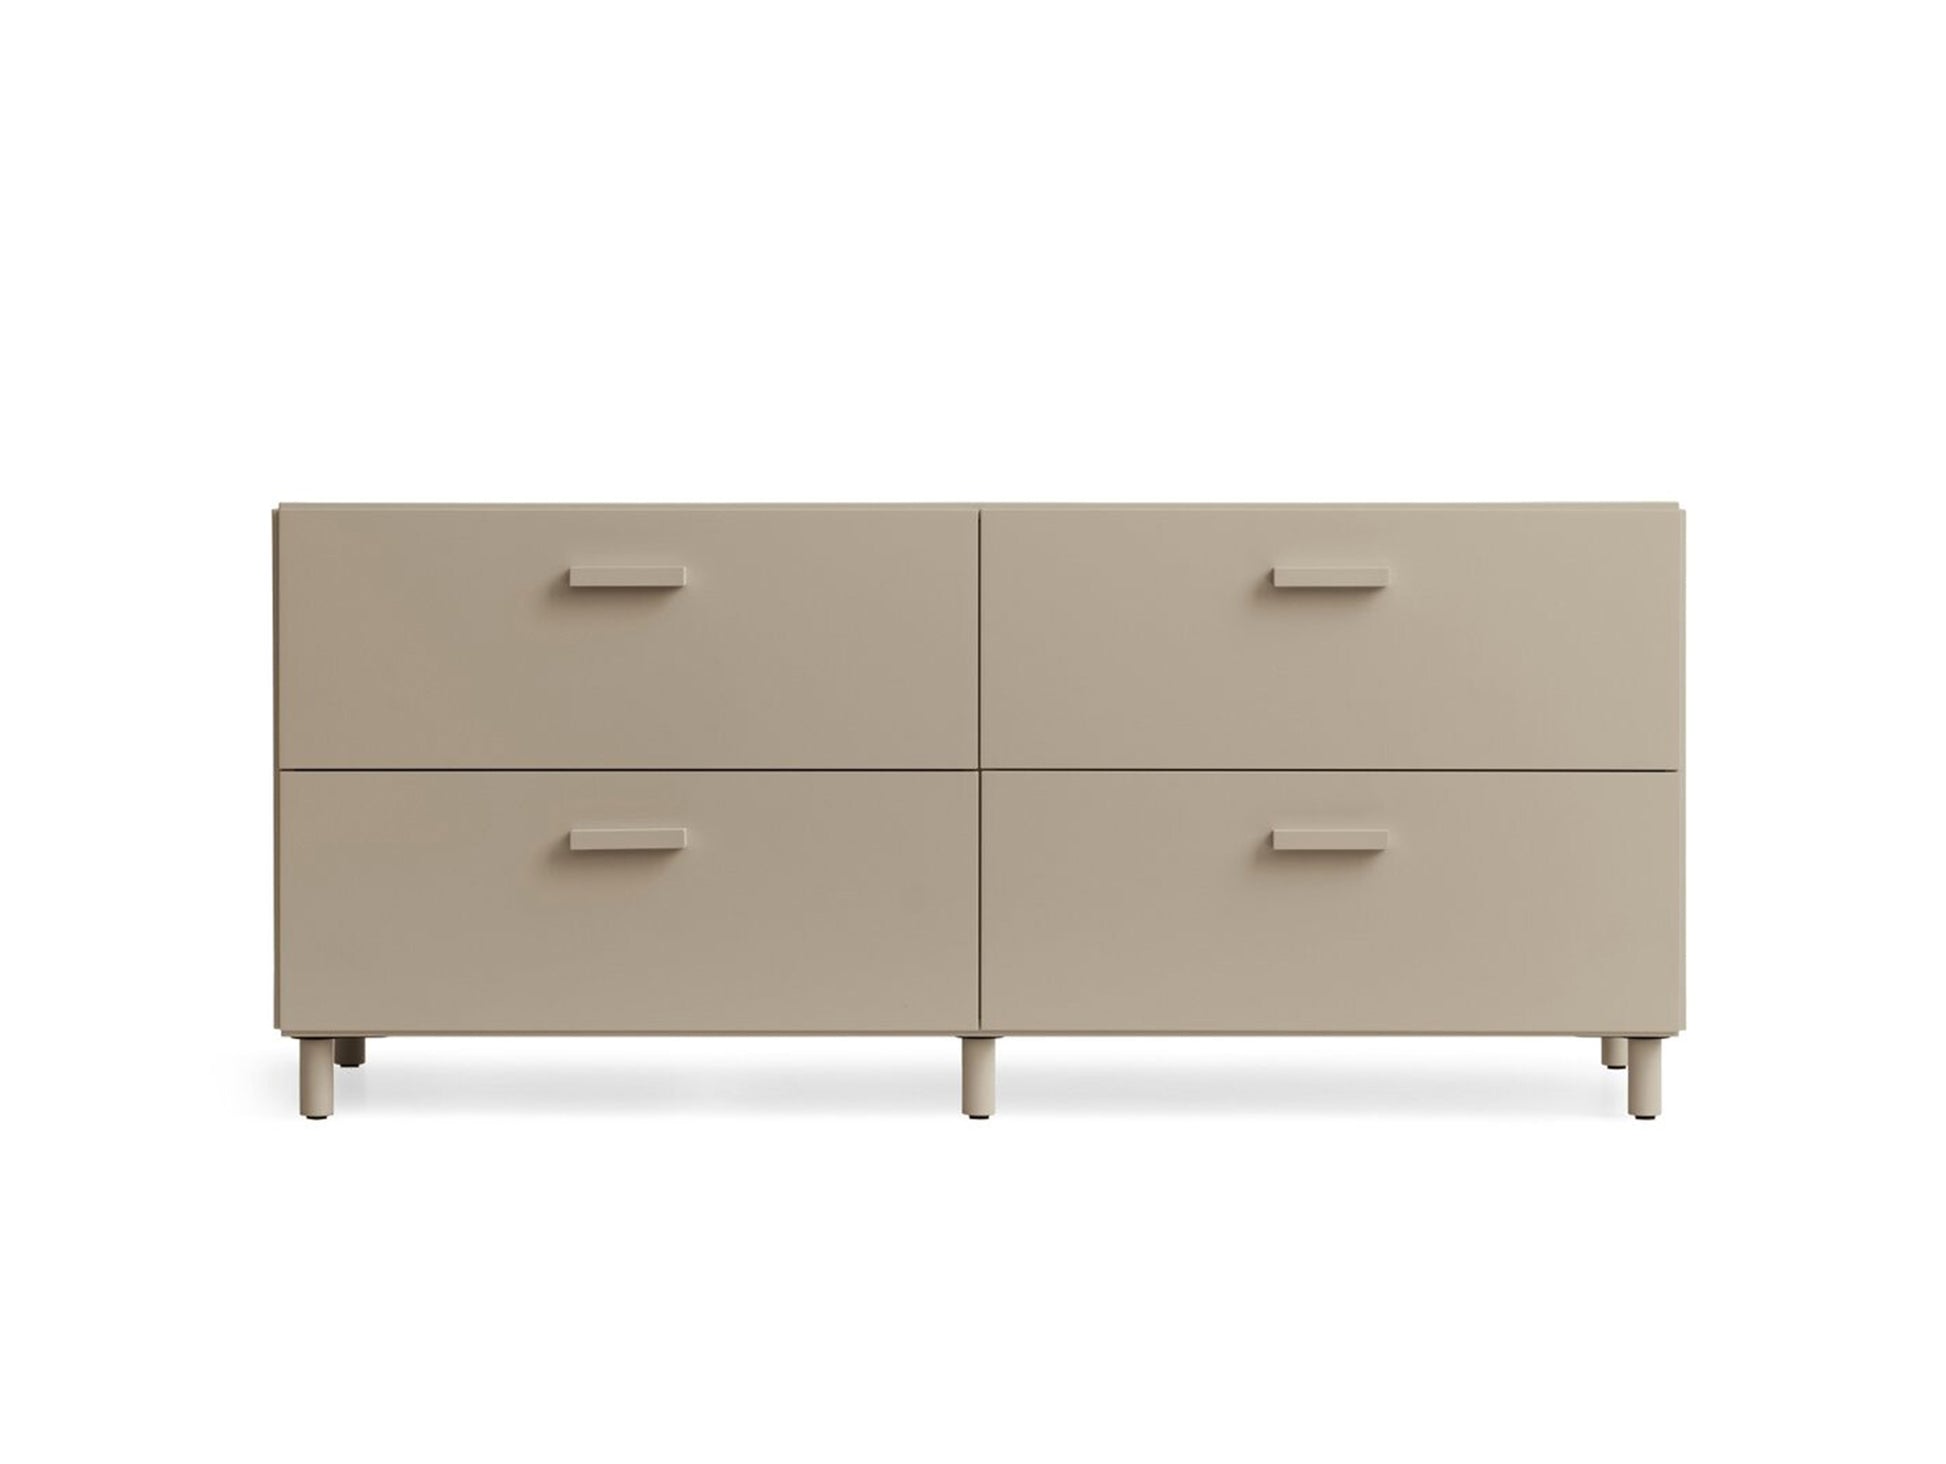 Relief Drawer with Legs- Low by String - Beige